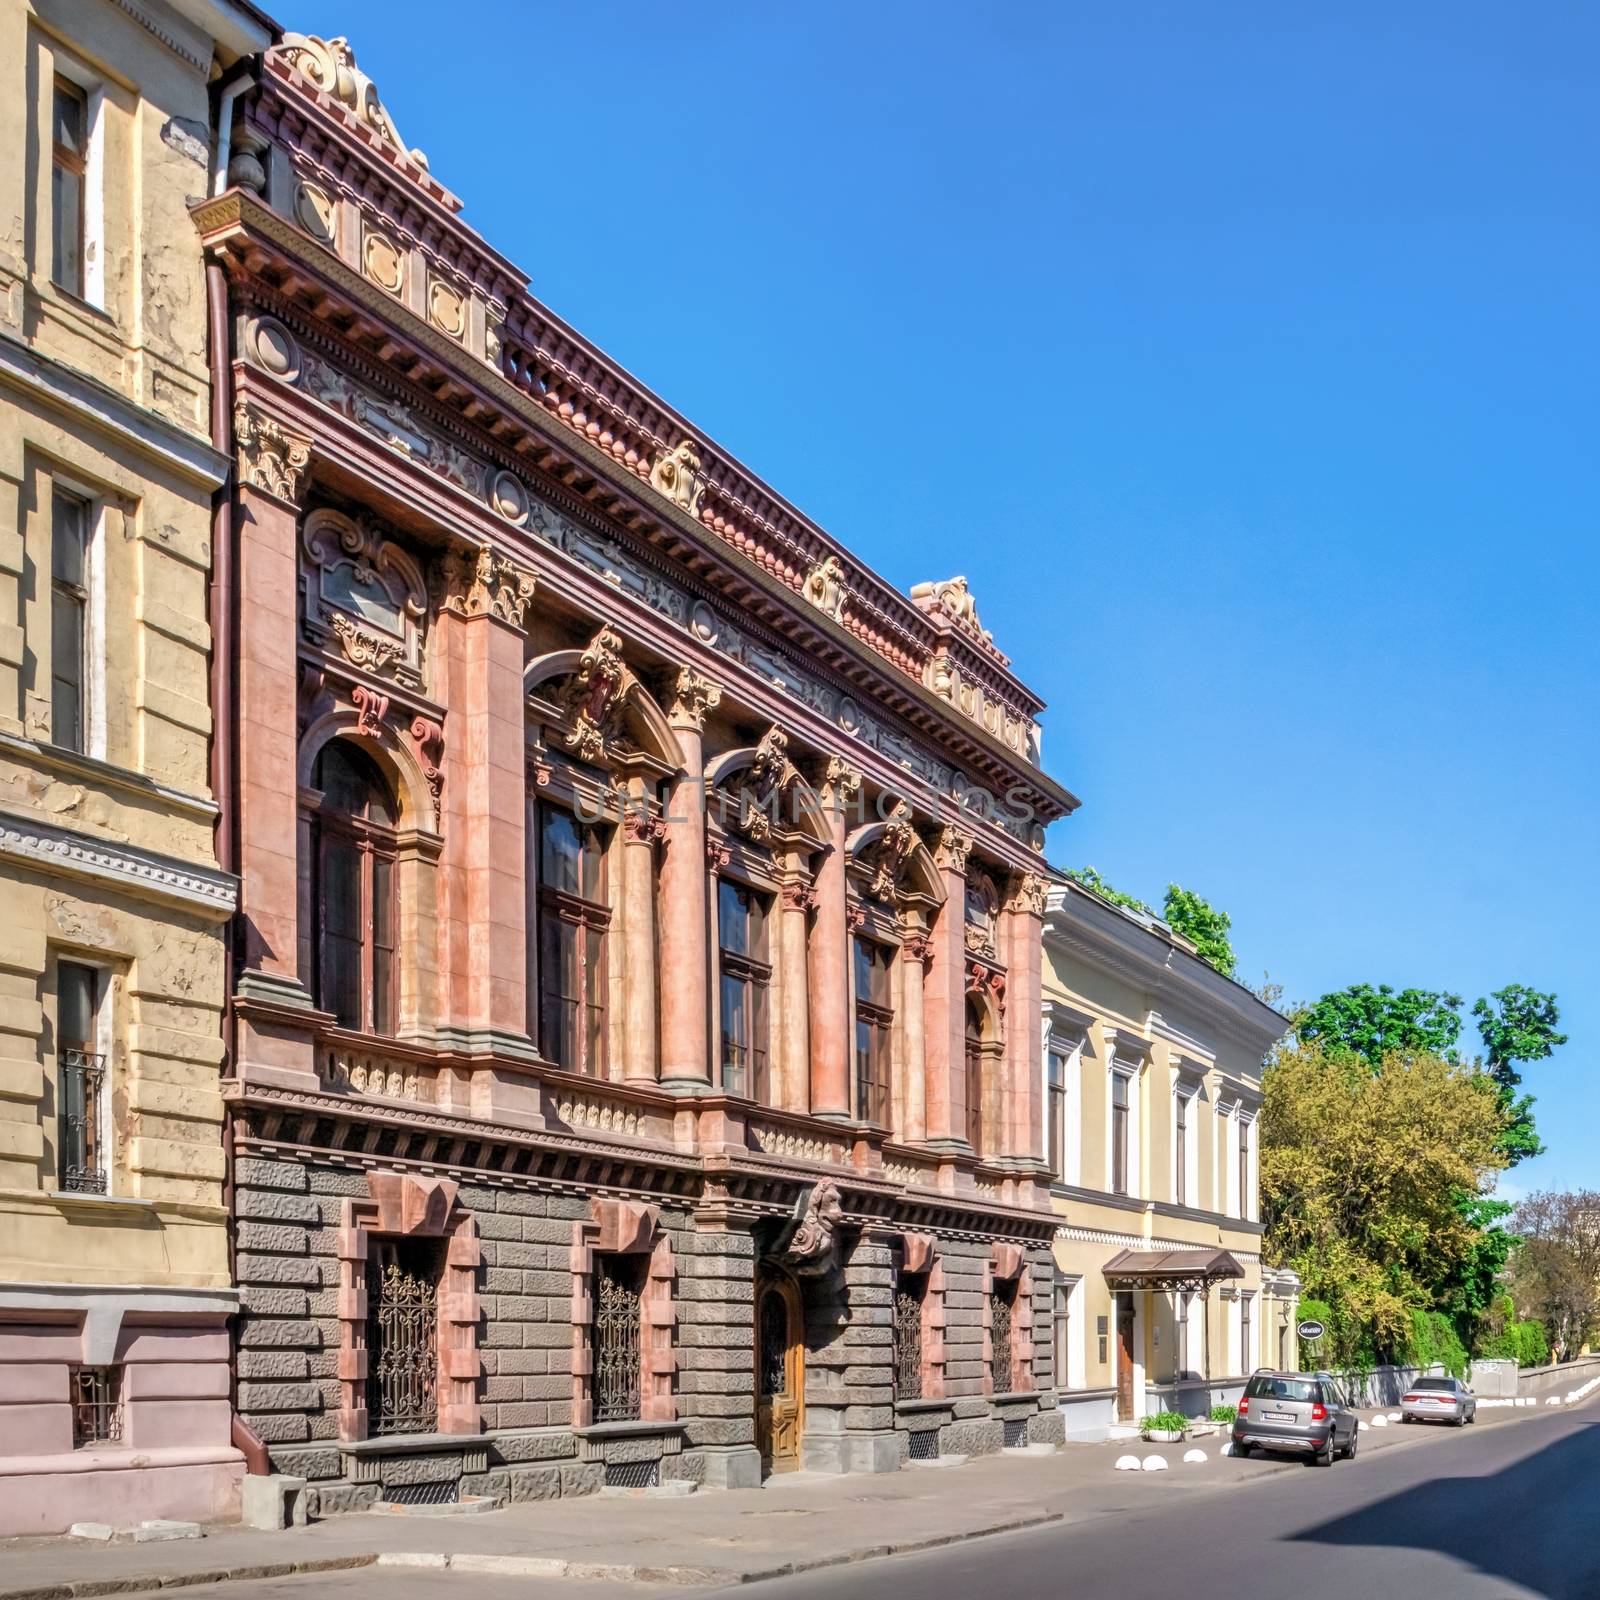 Palace of Count Tolstoy or House of Scientists in Odessa, Ukrain by Multipedia